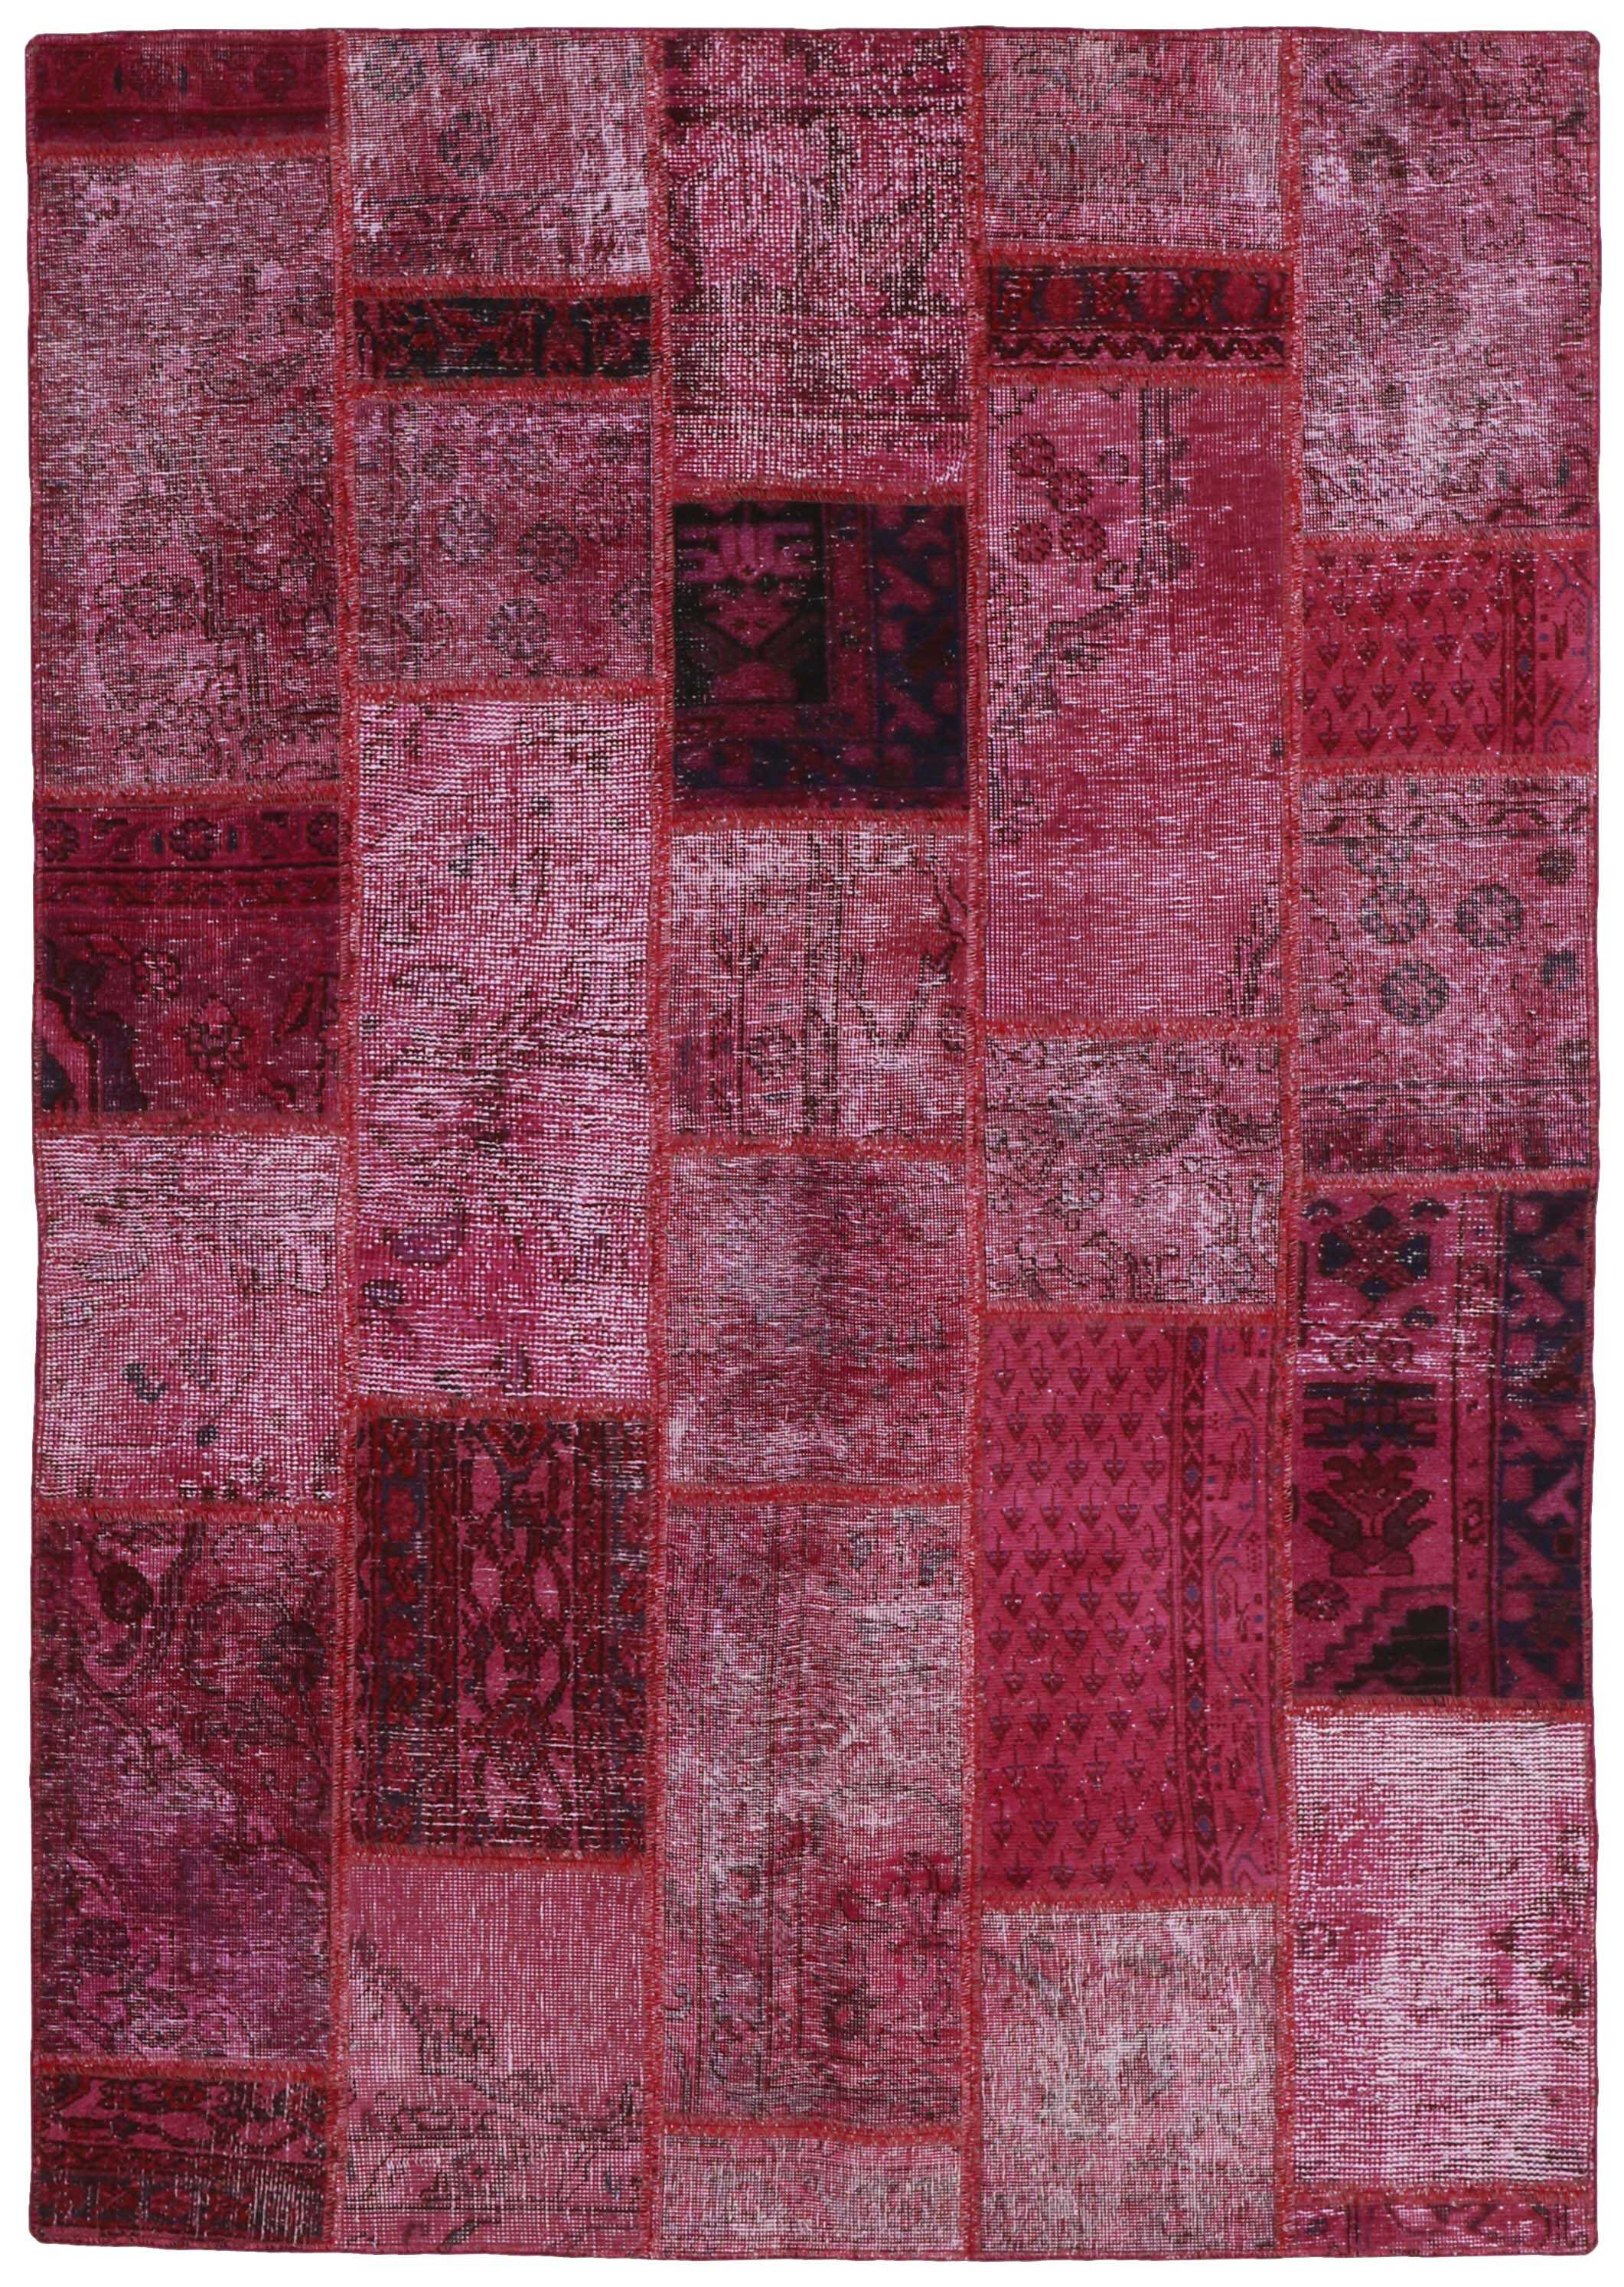 Authentic red patchwork persian rug